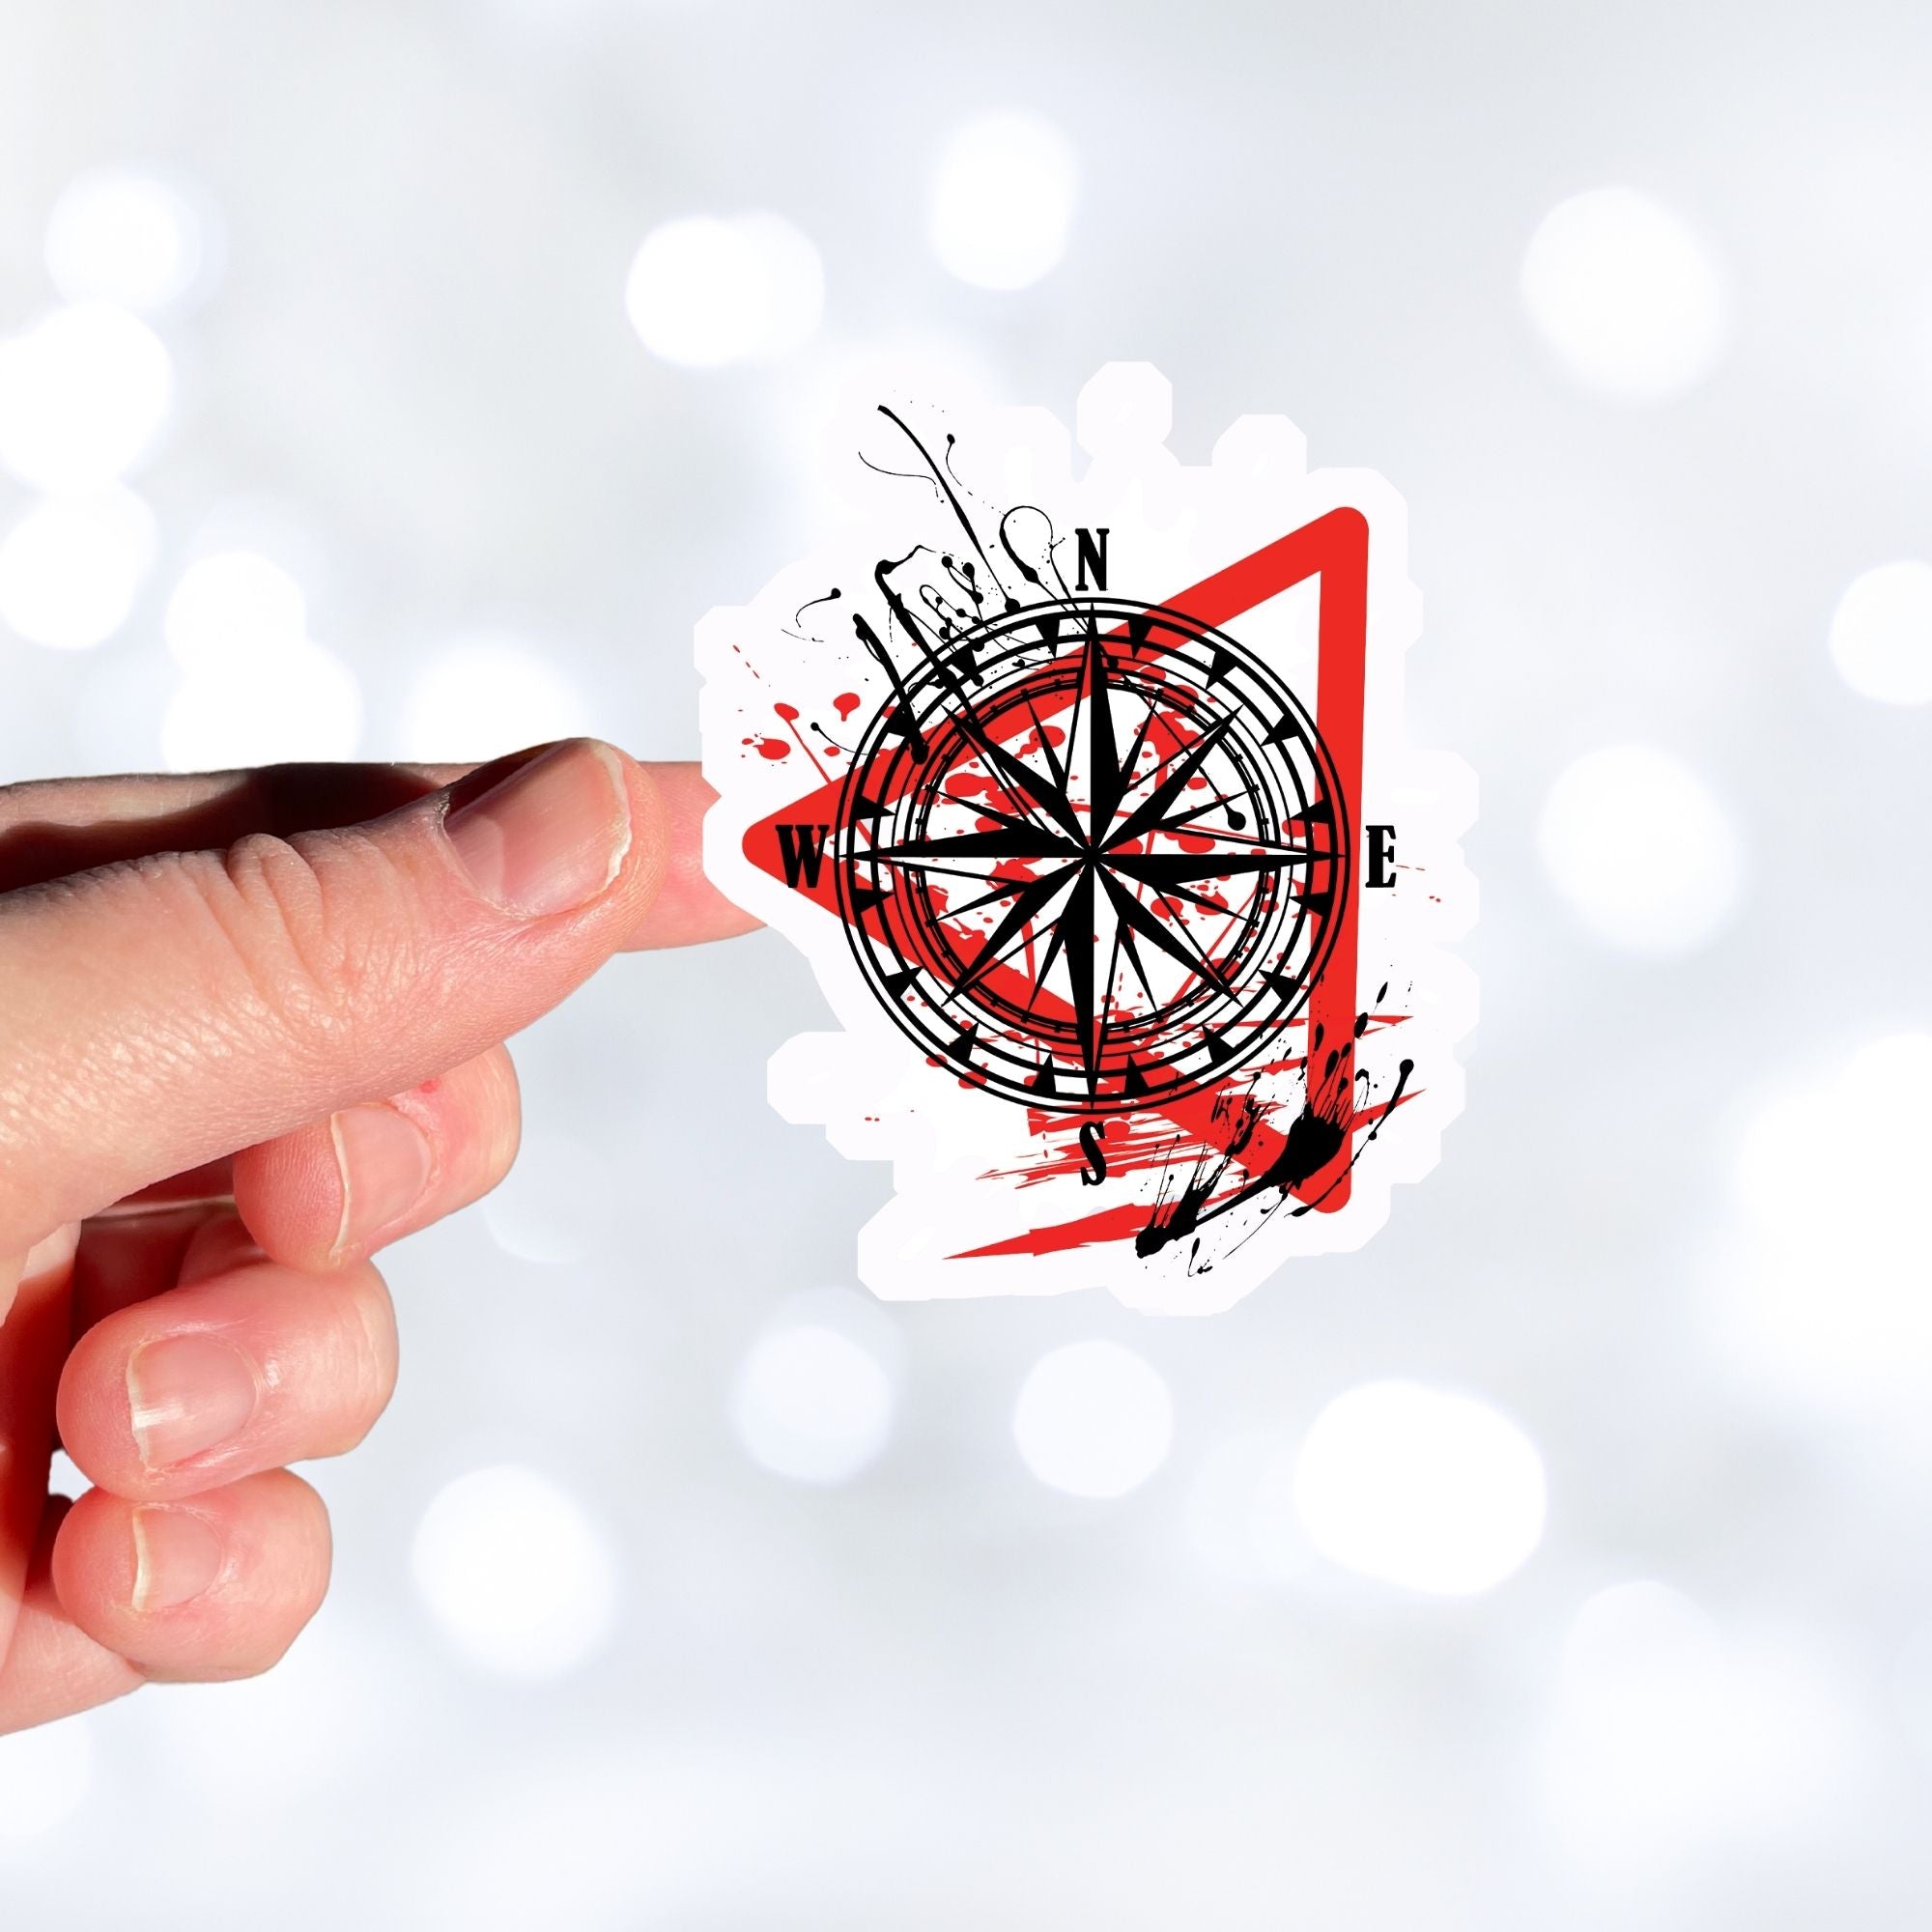 Trash Polka uses red, black, and white with a combination of abstract, surrealistic, and realistic images, and this individual die-cut sticker features a compass inside a red triangle outline on a white background. This image shows a hand holding the trash polka compass sticker.